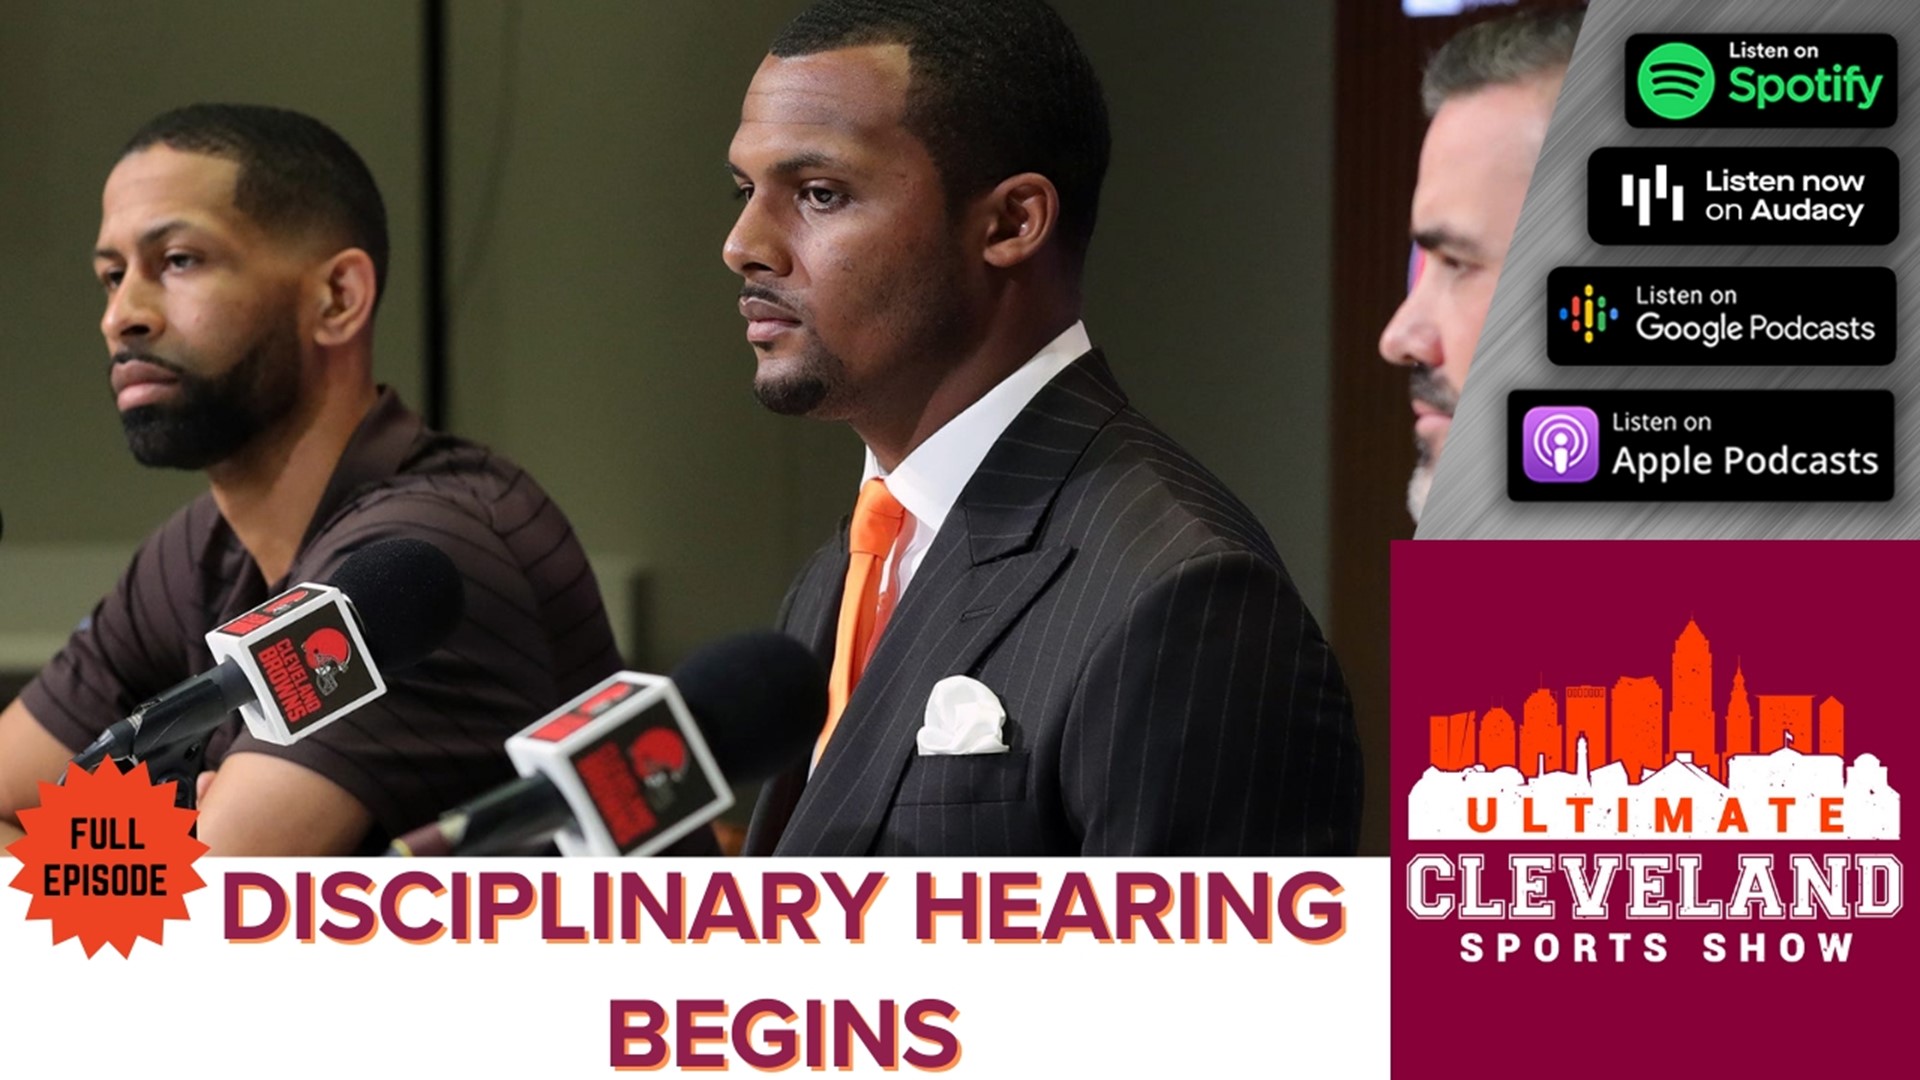 The guys discuss Deshaun Watson's hearing process and what the NFL is really trying to do. Brian Hartline talks Ohio State recruiting plus Josina Anderson joins UCSS